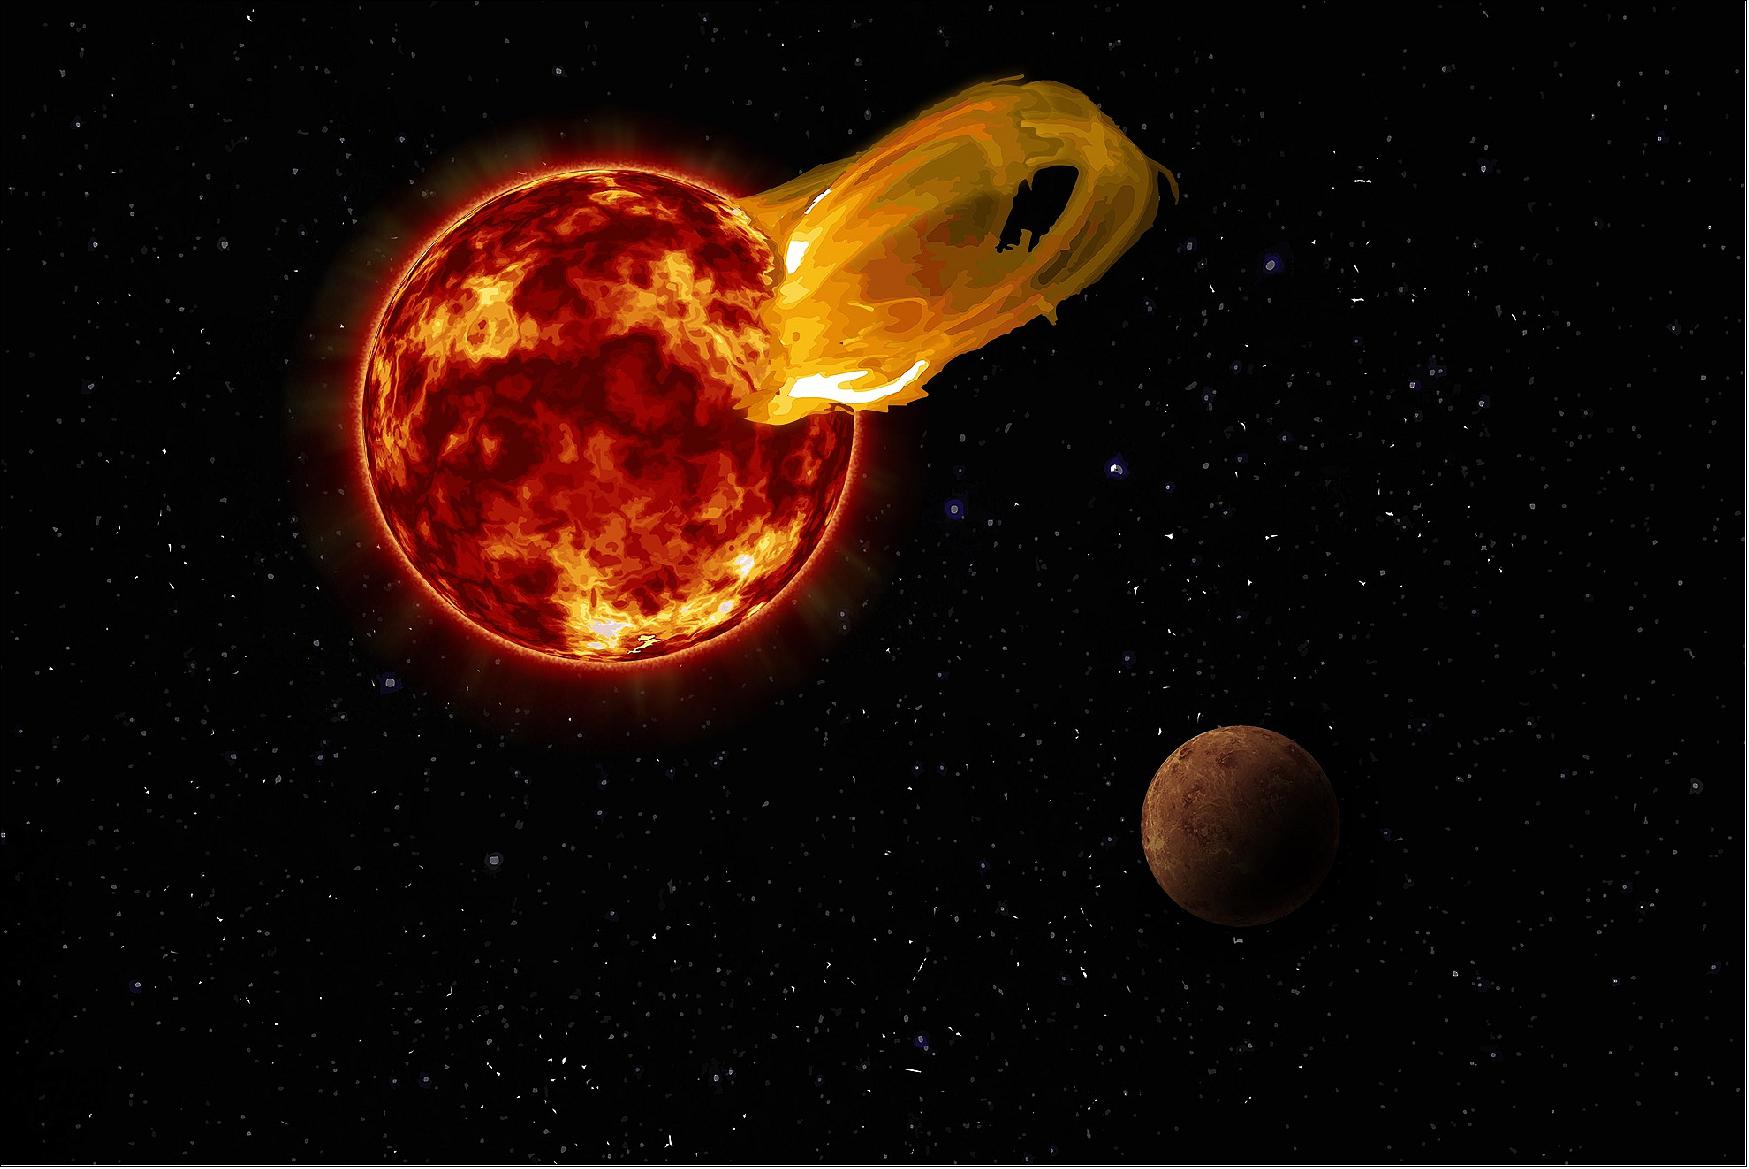 Figure 25: An artist's impression of a flare from Proxima Centauri, modeled after the loops of glowing hot gas seen in the largest solar flares. An artist's impression of the exoplanet Proxima b is shown in the foreground. Proxima b orbits its star 20 times closer than the Earth orbits the Sun. A flare 10 times larger than a major solar flare would blast Proxima b with 4,000 times more radiation than the Earth gets from our Sun's flares (image credit: Roberto Molar Candanosa / Carnegie Institution for Science, NASA/SDO, NASA/JPL)